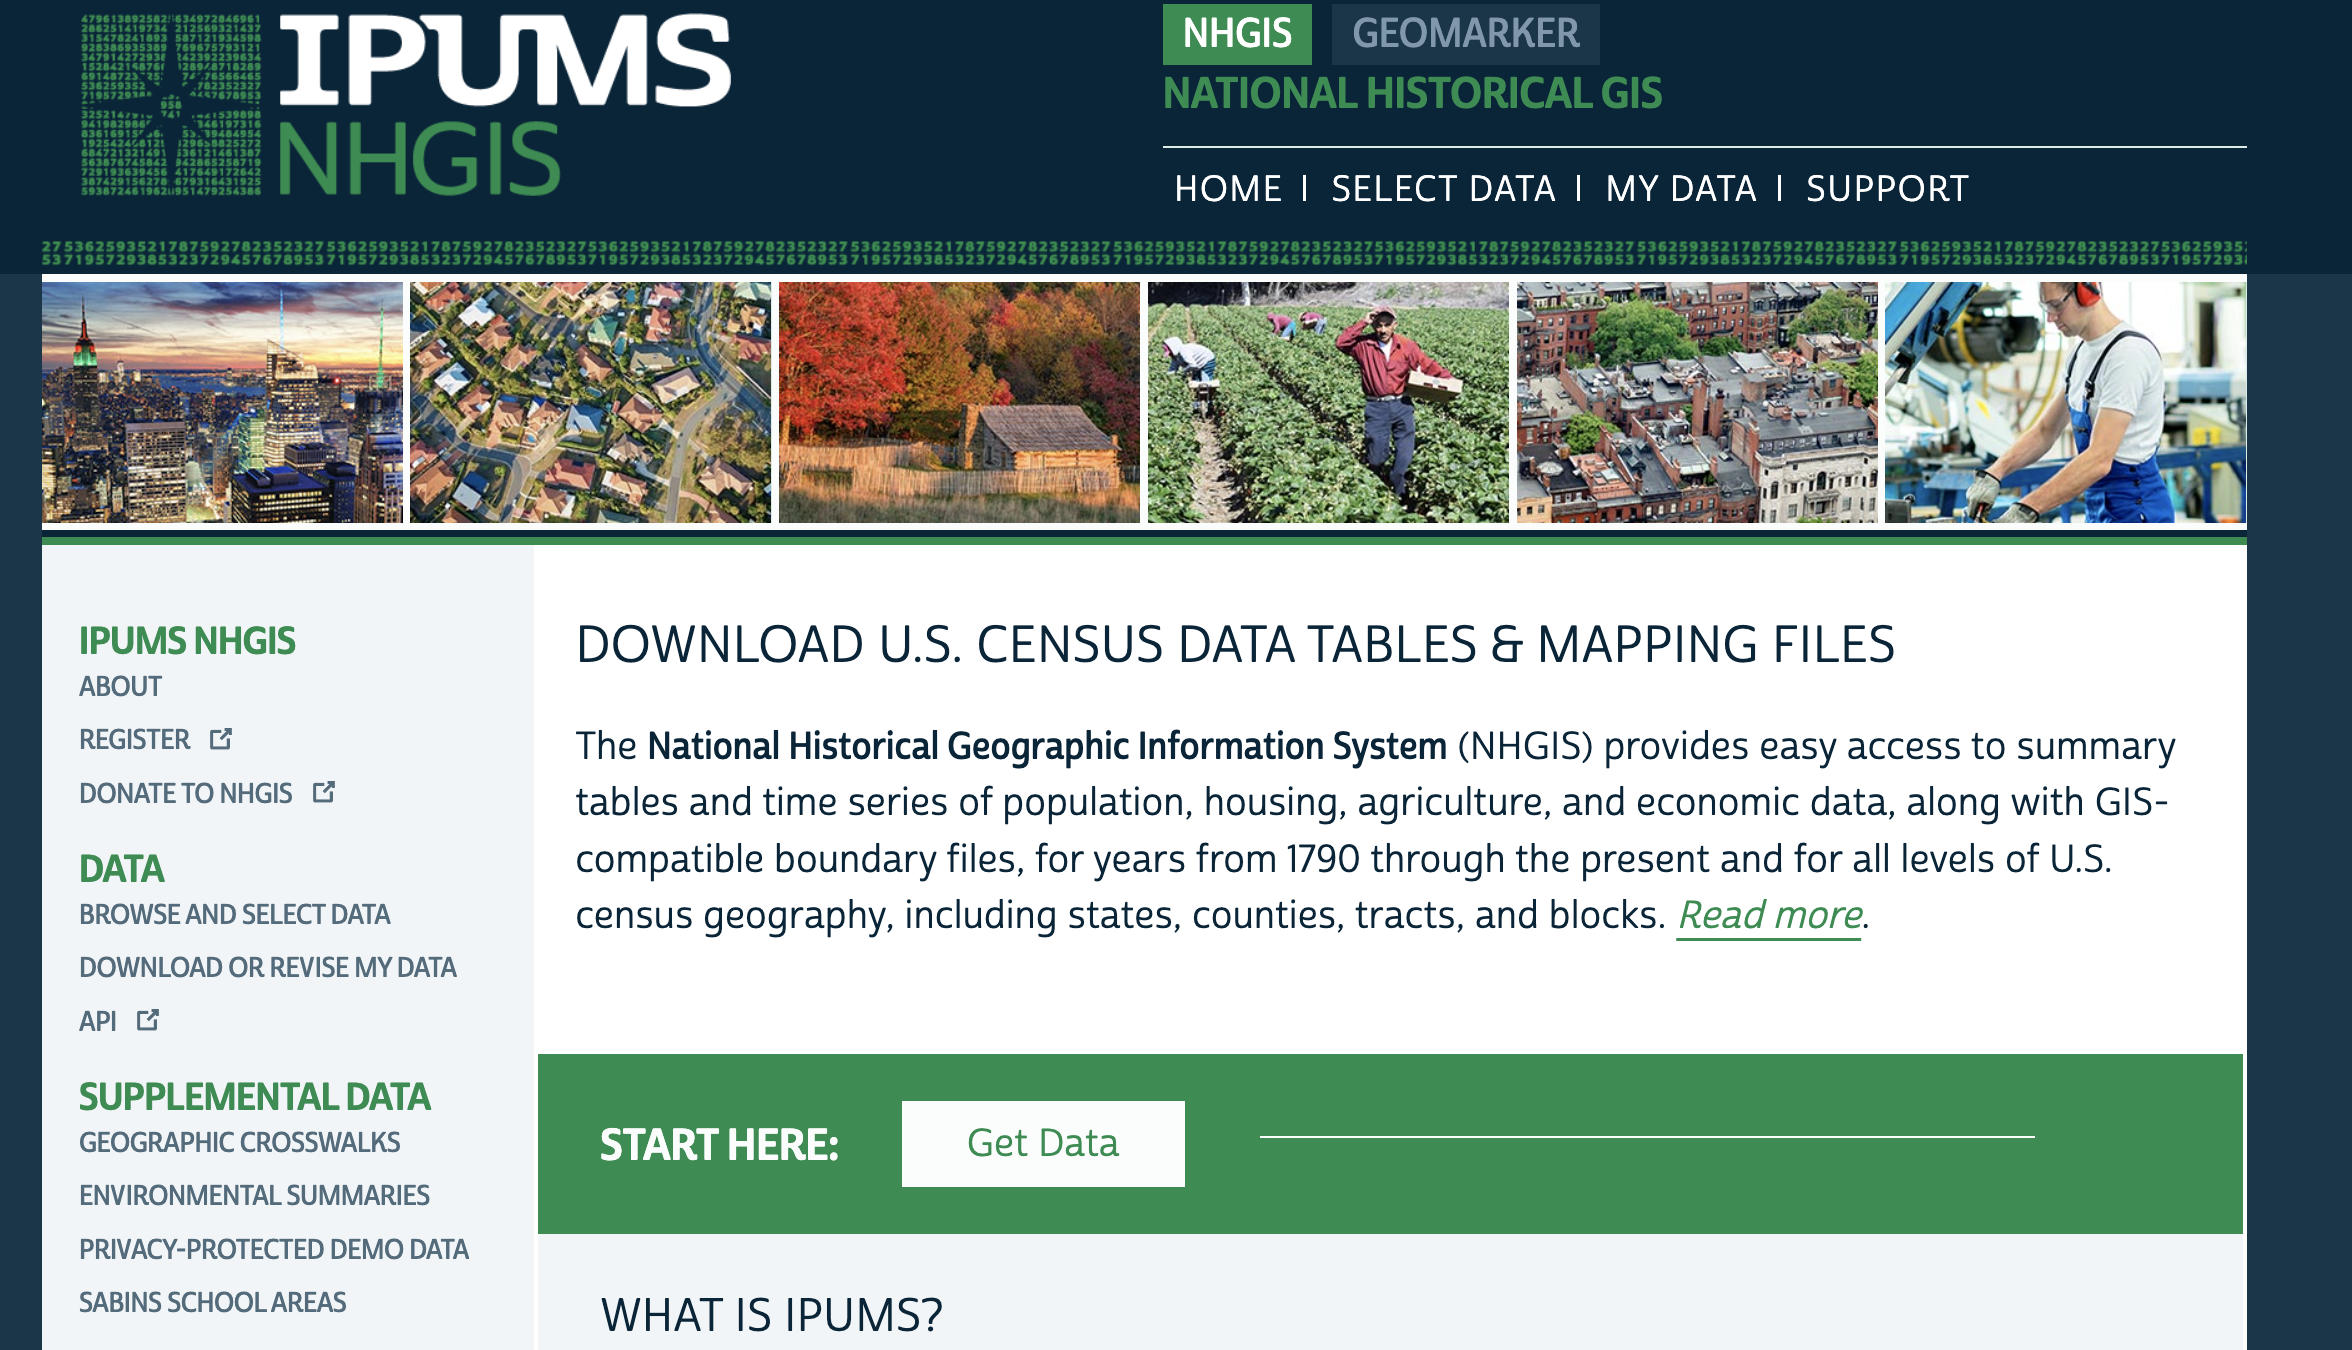 Download census data for GIS